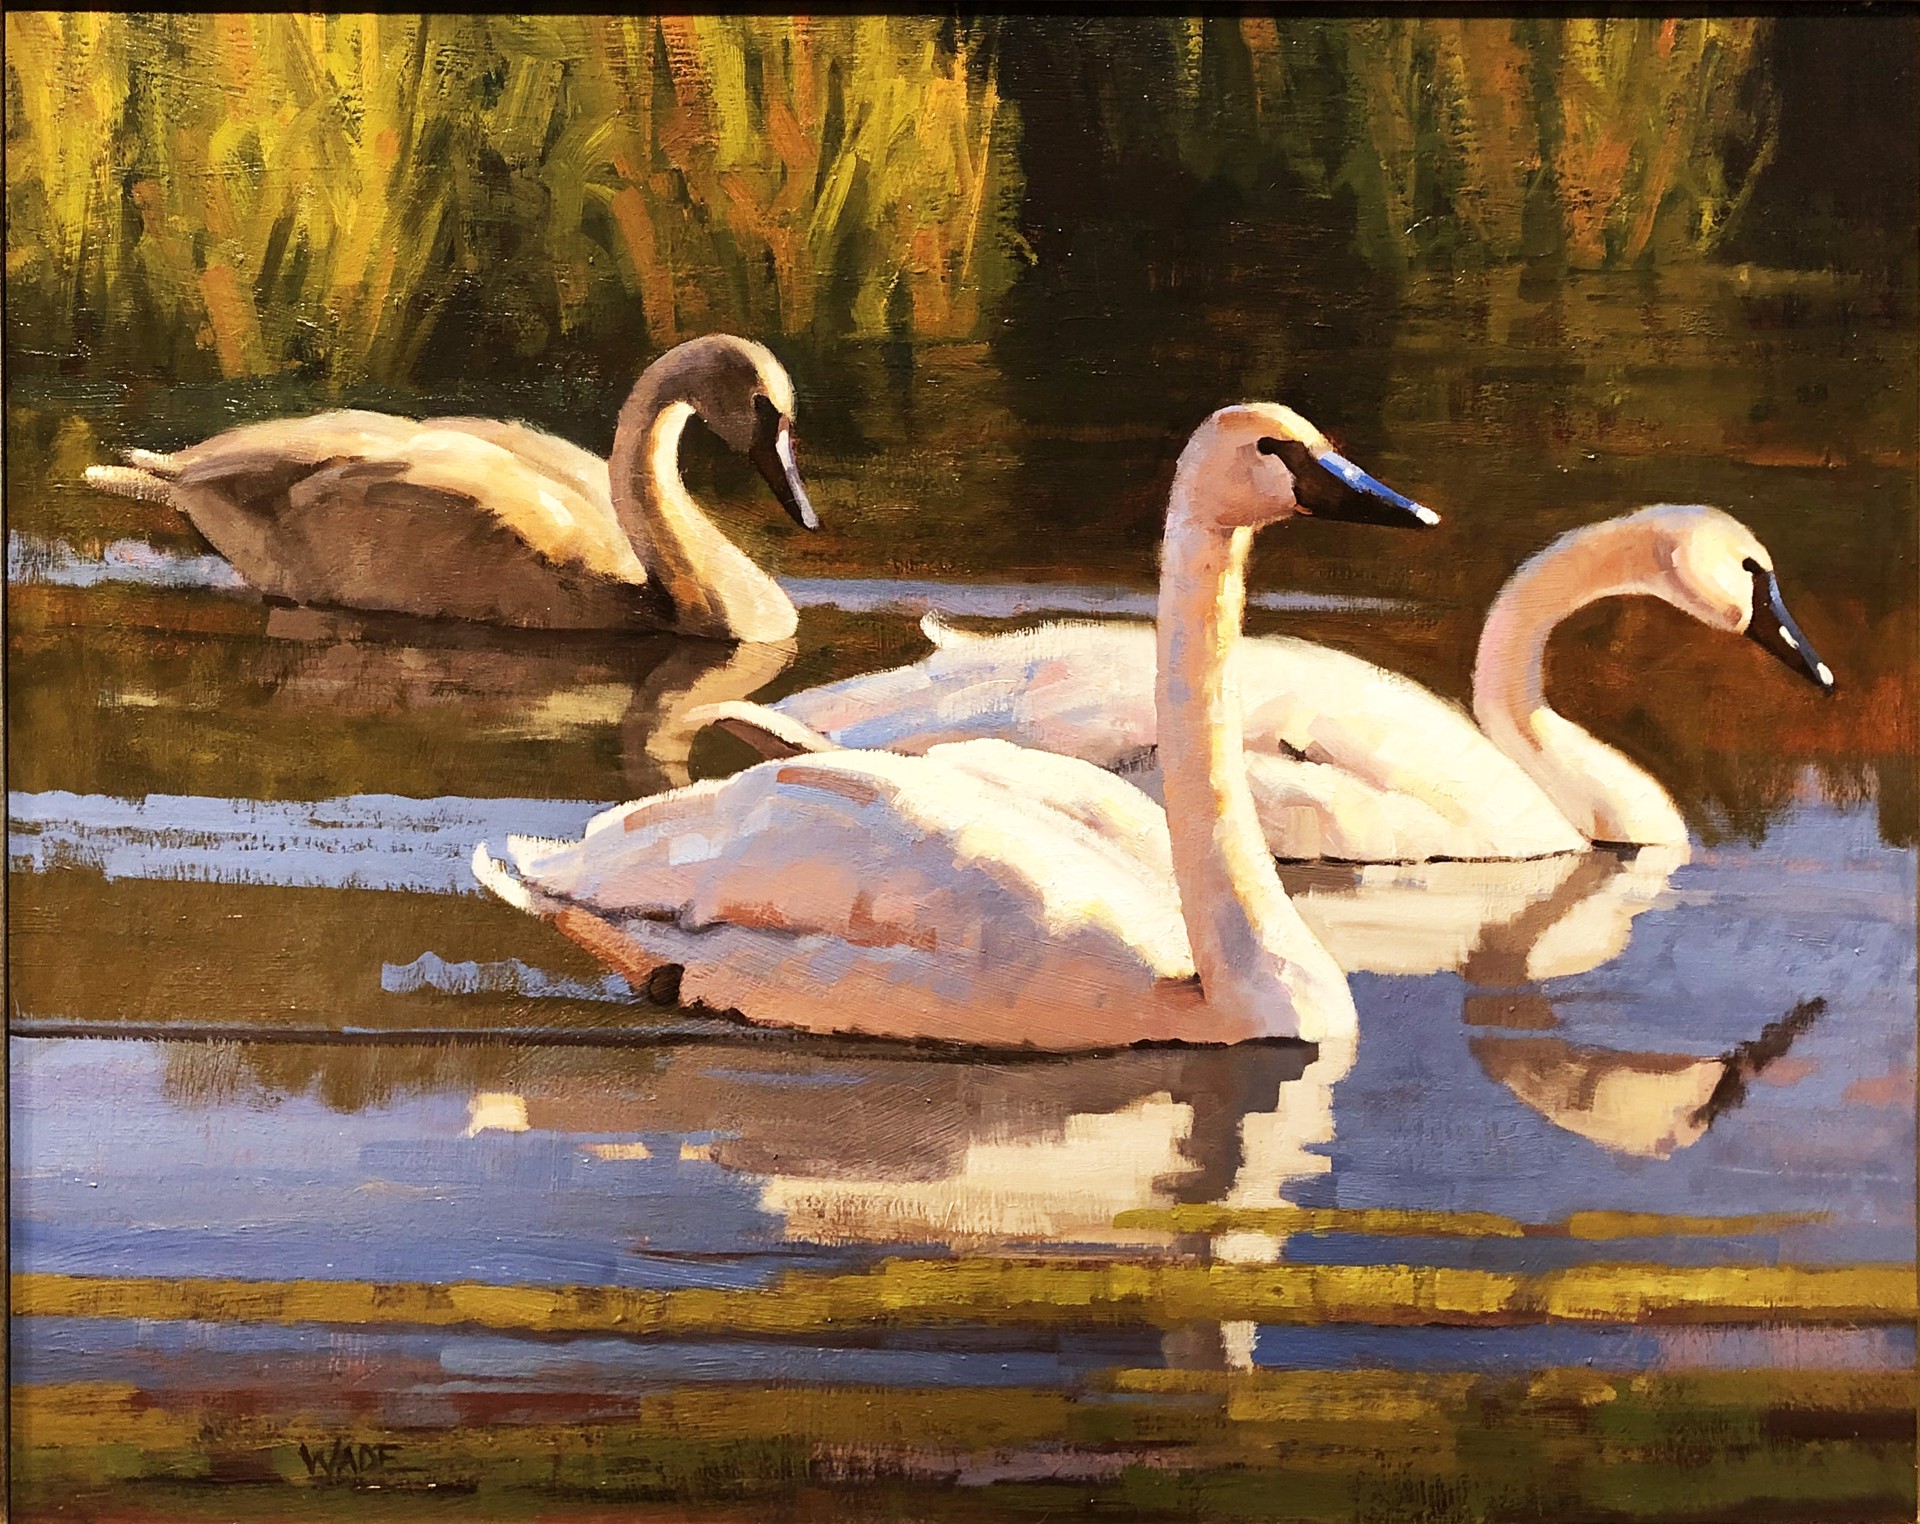 Swans with Signet by Dave Wade